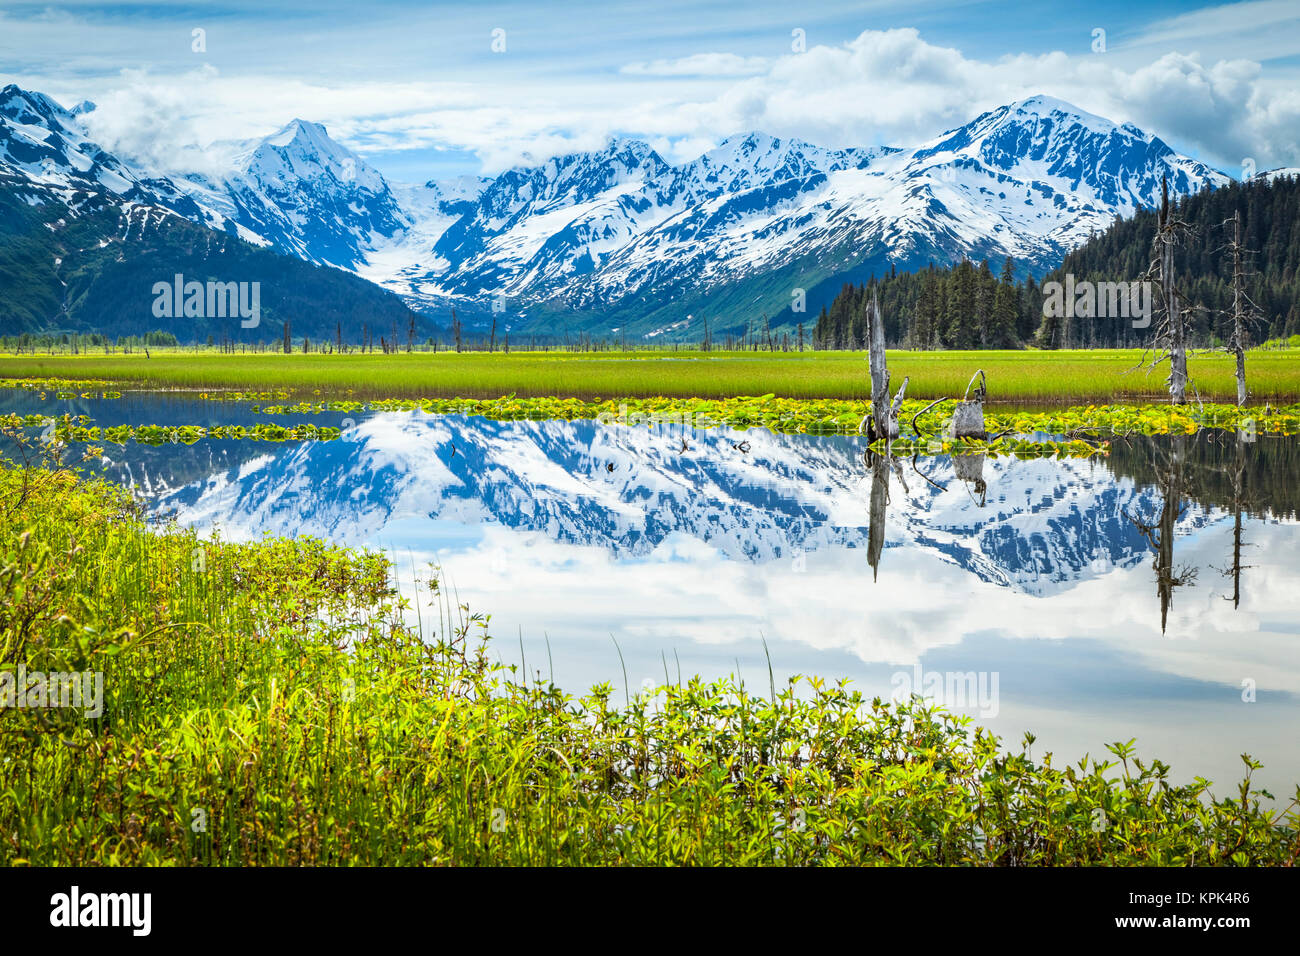 Reflection of Chugach Mountains in a tranquil lake; Alaska, United States of America Stock Photo